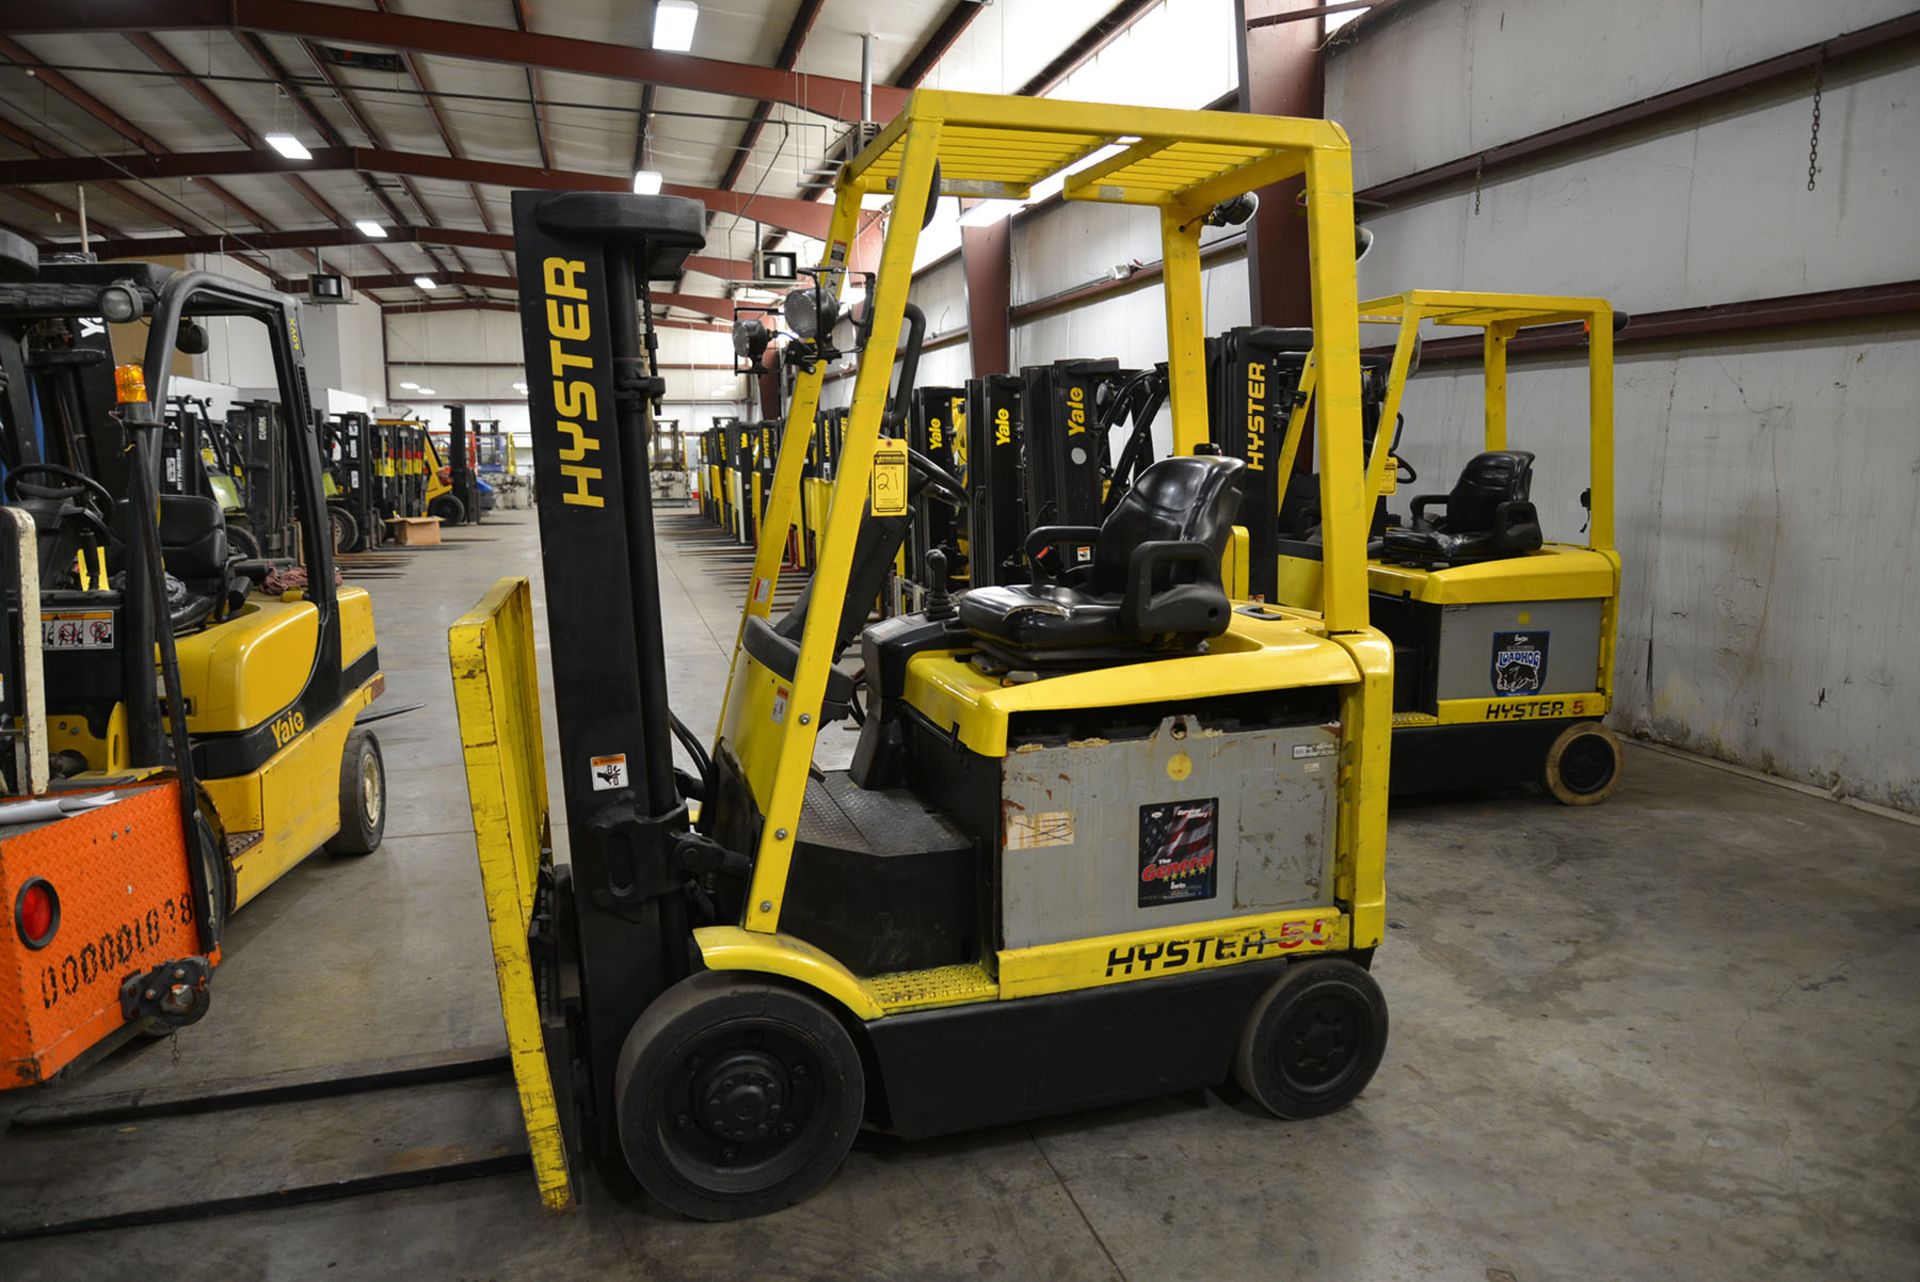 2007 HYSTER 5,500-LB., MODEL: E55Z-33, SN: G108N06319E, 48V ELECTRIC, SOLID TIRES, MONOTROL, 3-STAGE